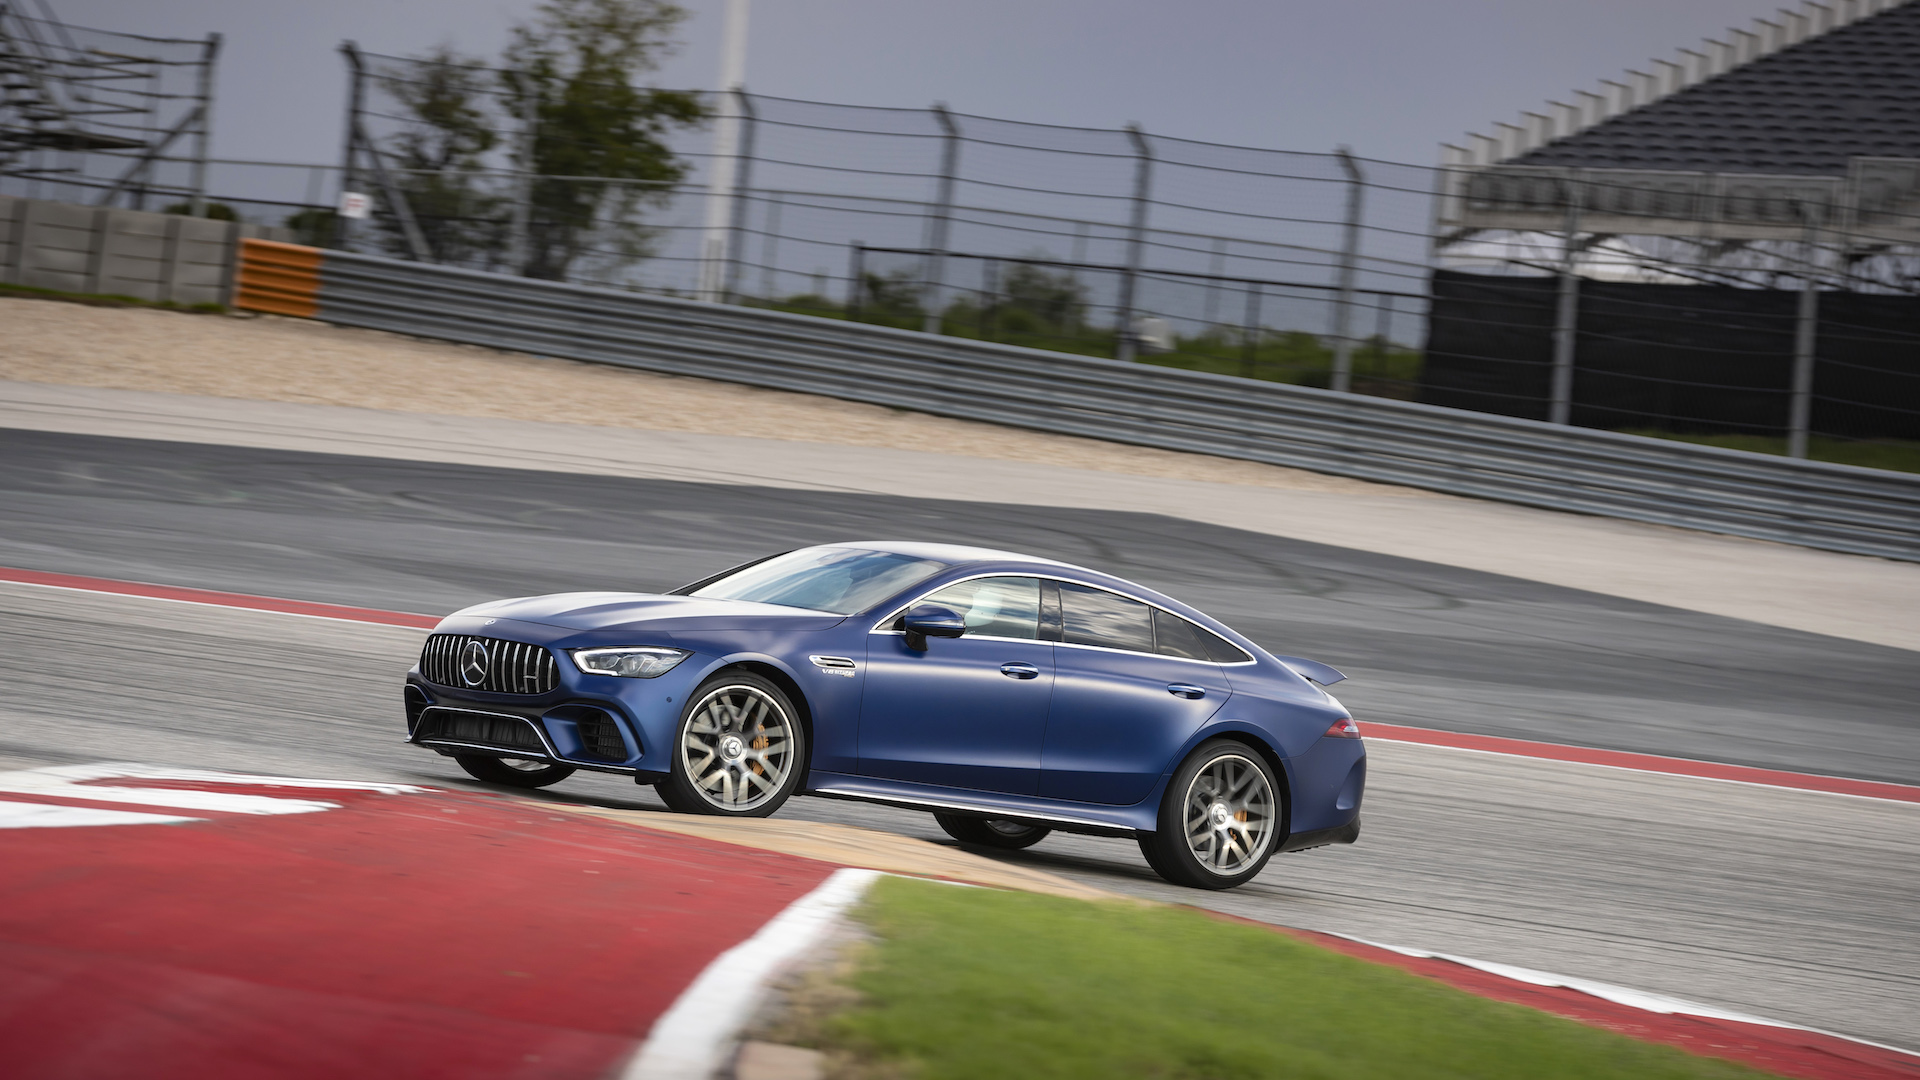 2019 Mercedes-AMG GT 63 S 4-Door Coupe, Circuit of the Americas, September, 2018